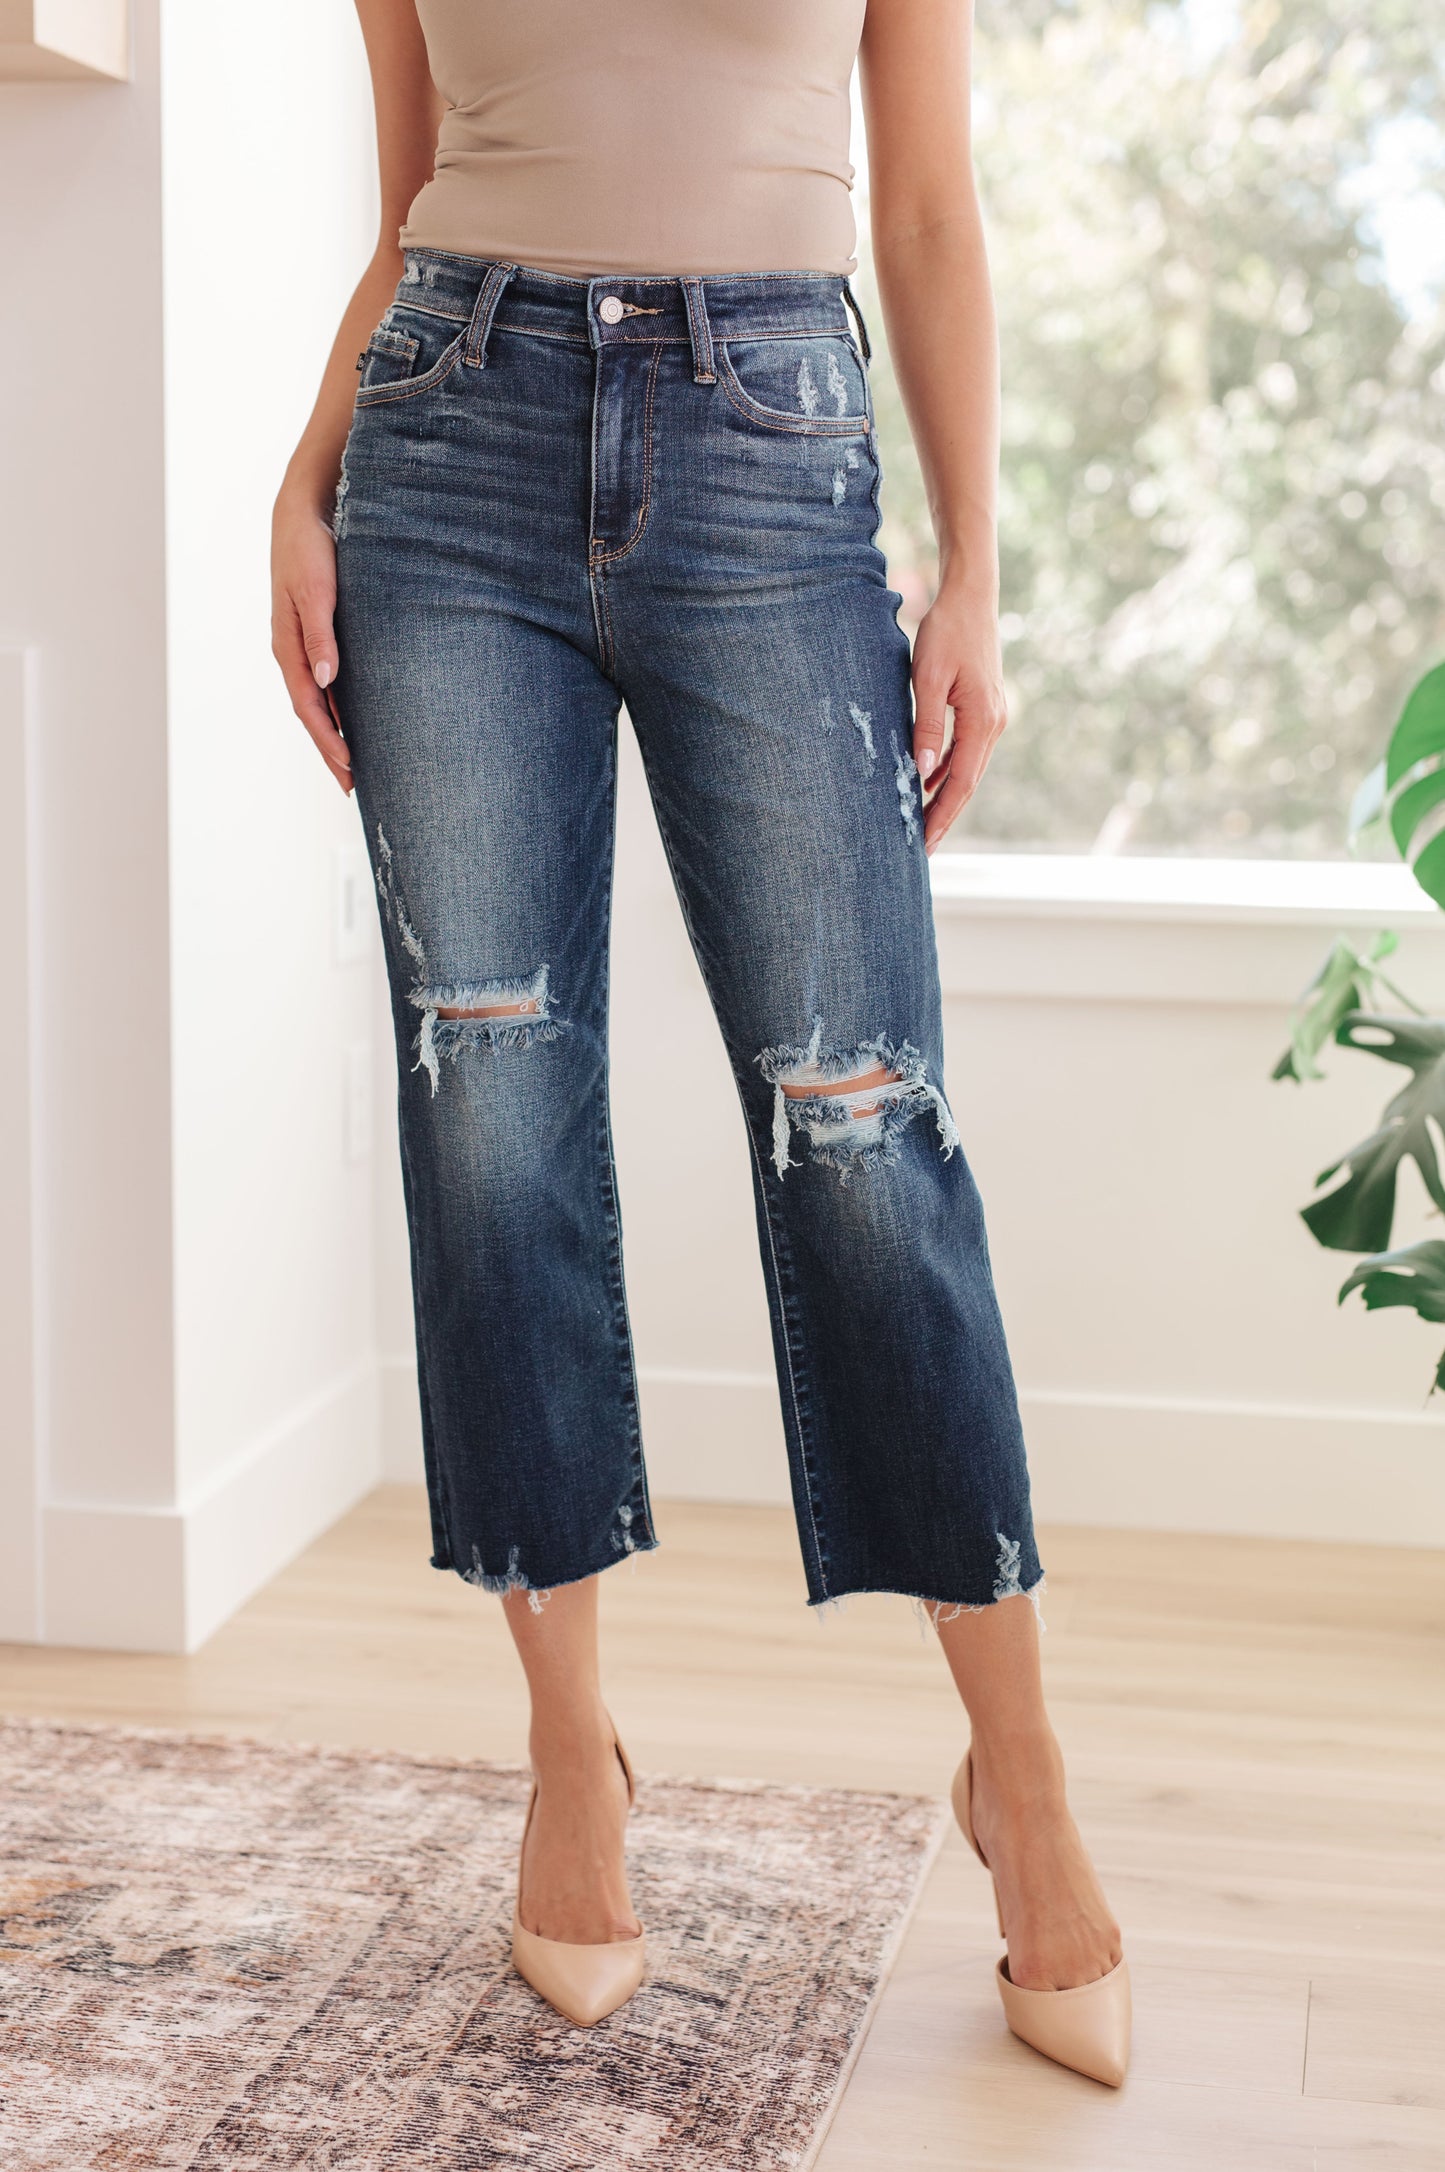 Whitney High Rise Distressed Wide Leg Crop Jeans from Judy Blue. With a high rise fit, dark wash, distressed detailing and raw hem, this jean offers the perfect blend of comfort and chic style. Judy Blue High Rise Zip Fly Dark Wash 4-Way Stretch Distressed Wide Leg Crop 0 - 24W